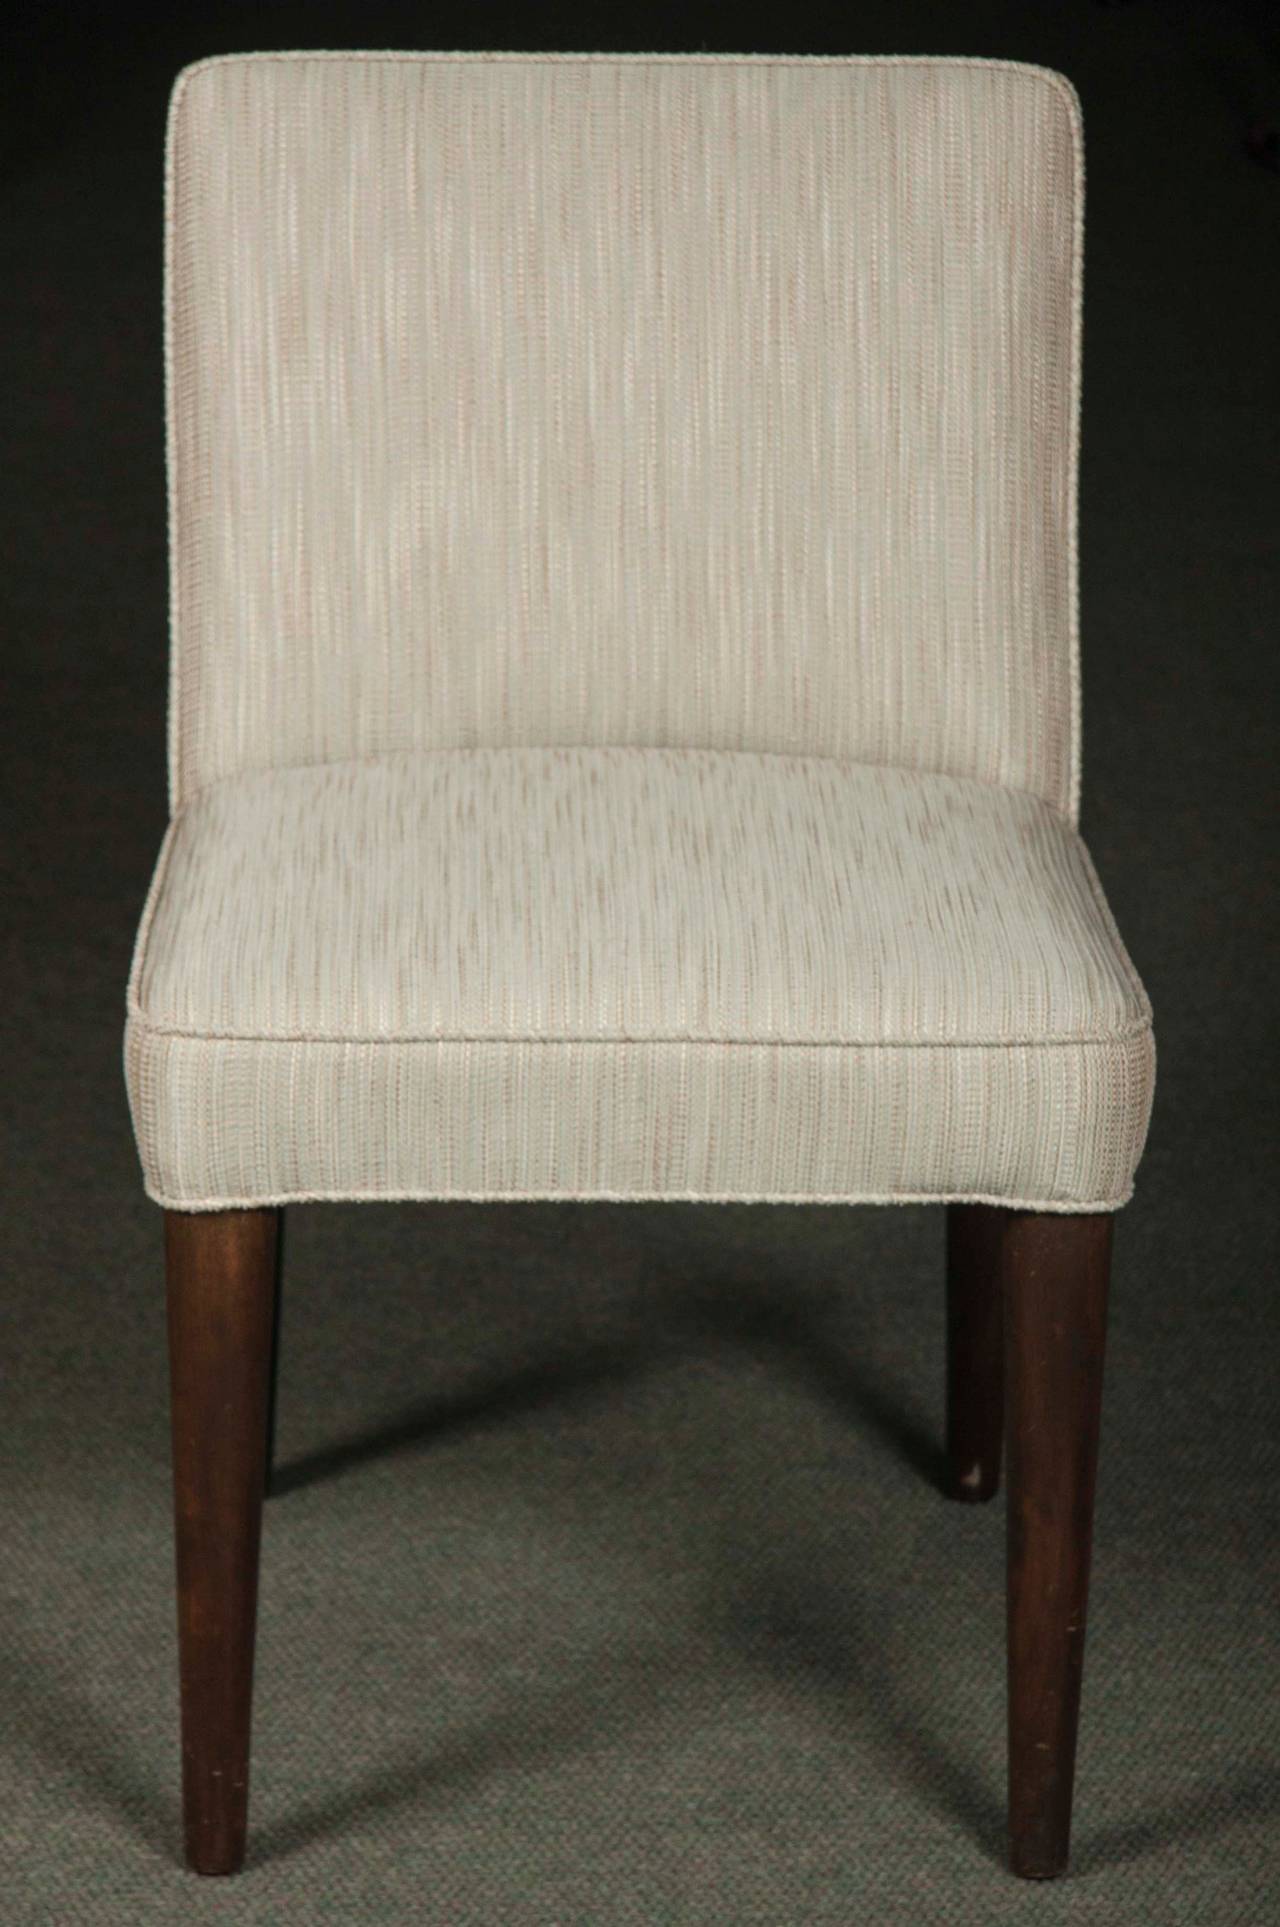 Set of 12 Mid-Century Modern newly reupholstered dining chairs.
Armchairs: 33